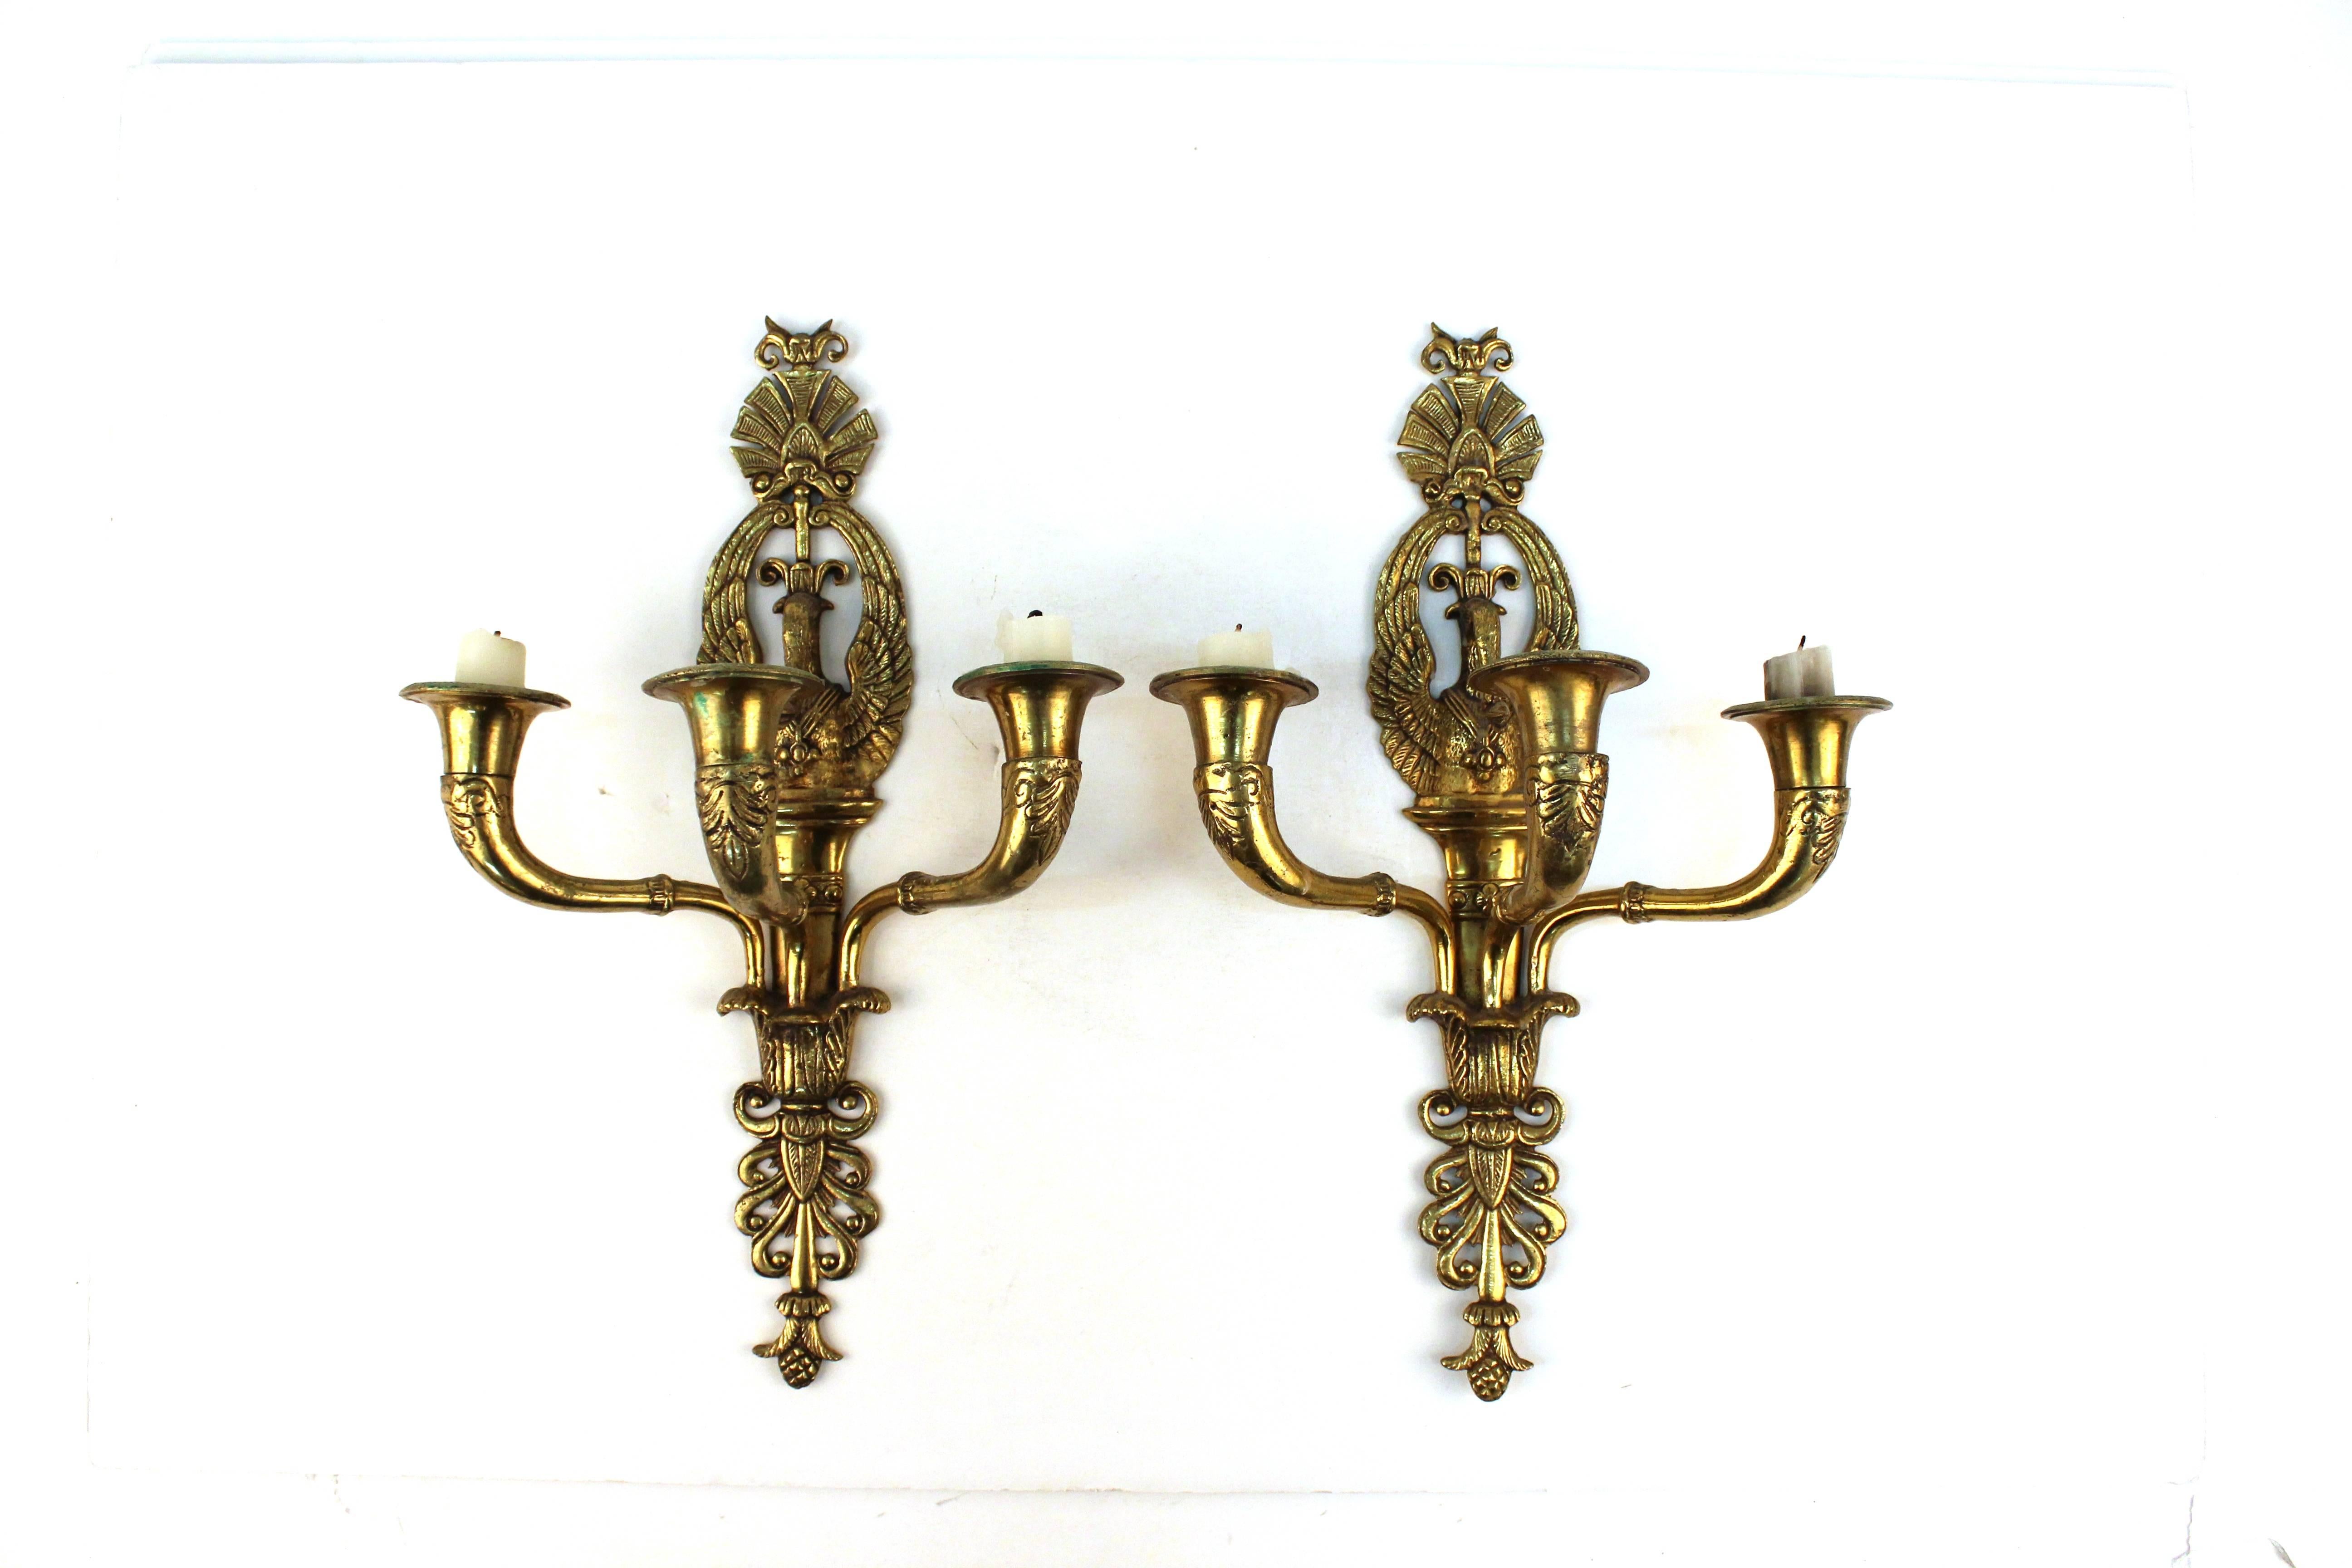 A pair of French Empire sconces from the 19th century featuring a swan motif and three candleholders.